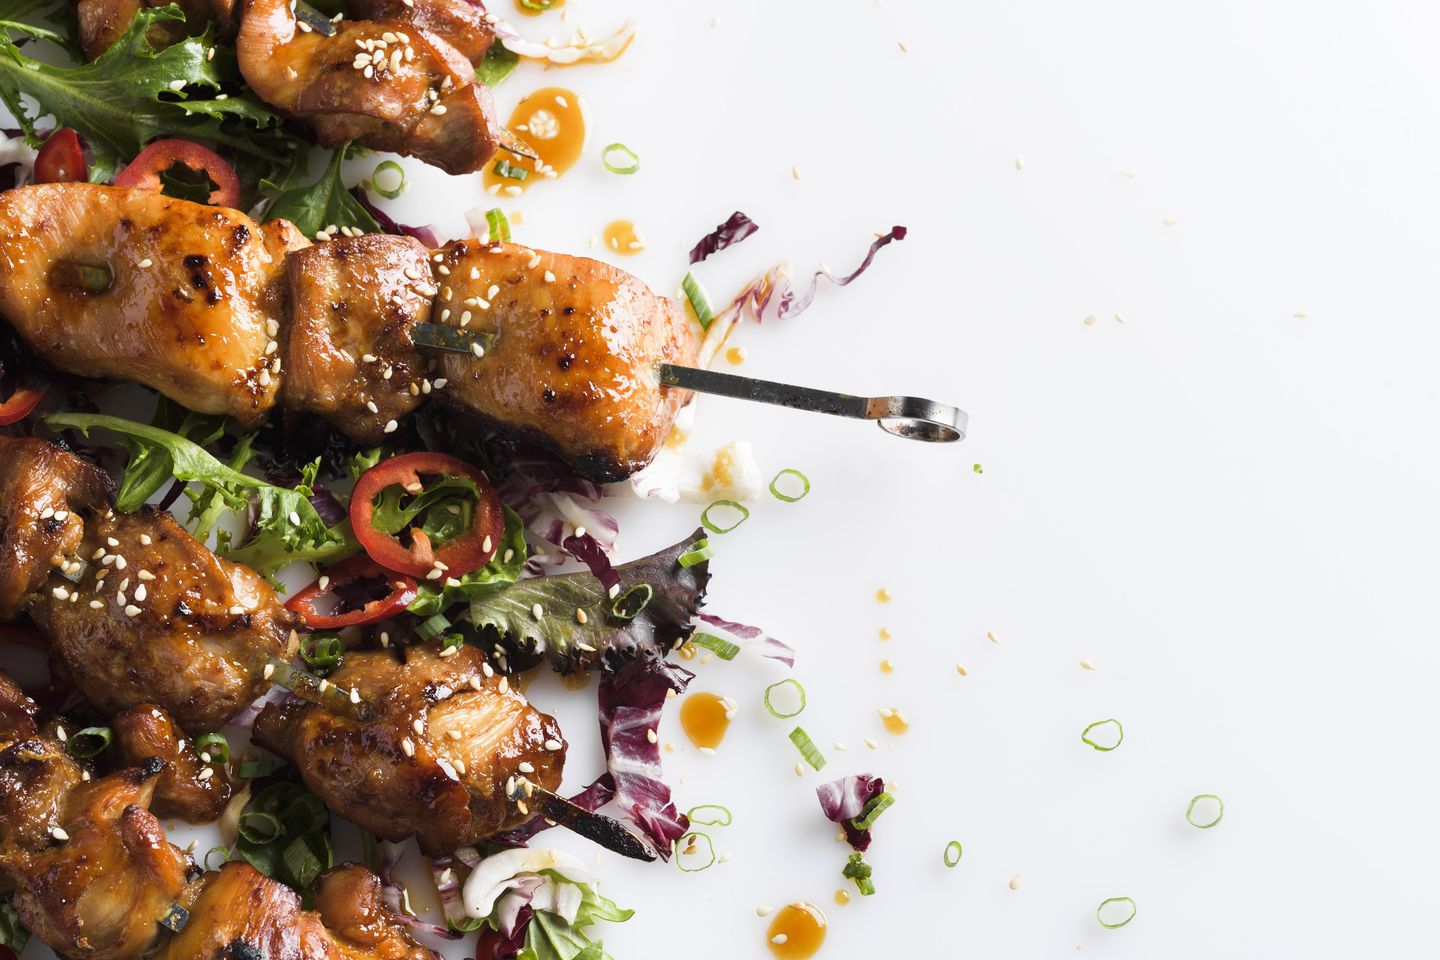 Evoking Asia's street vendors: Maple and soy glazed chicken skewers